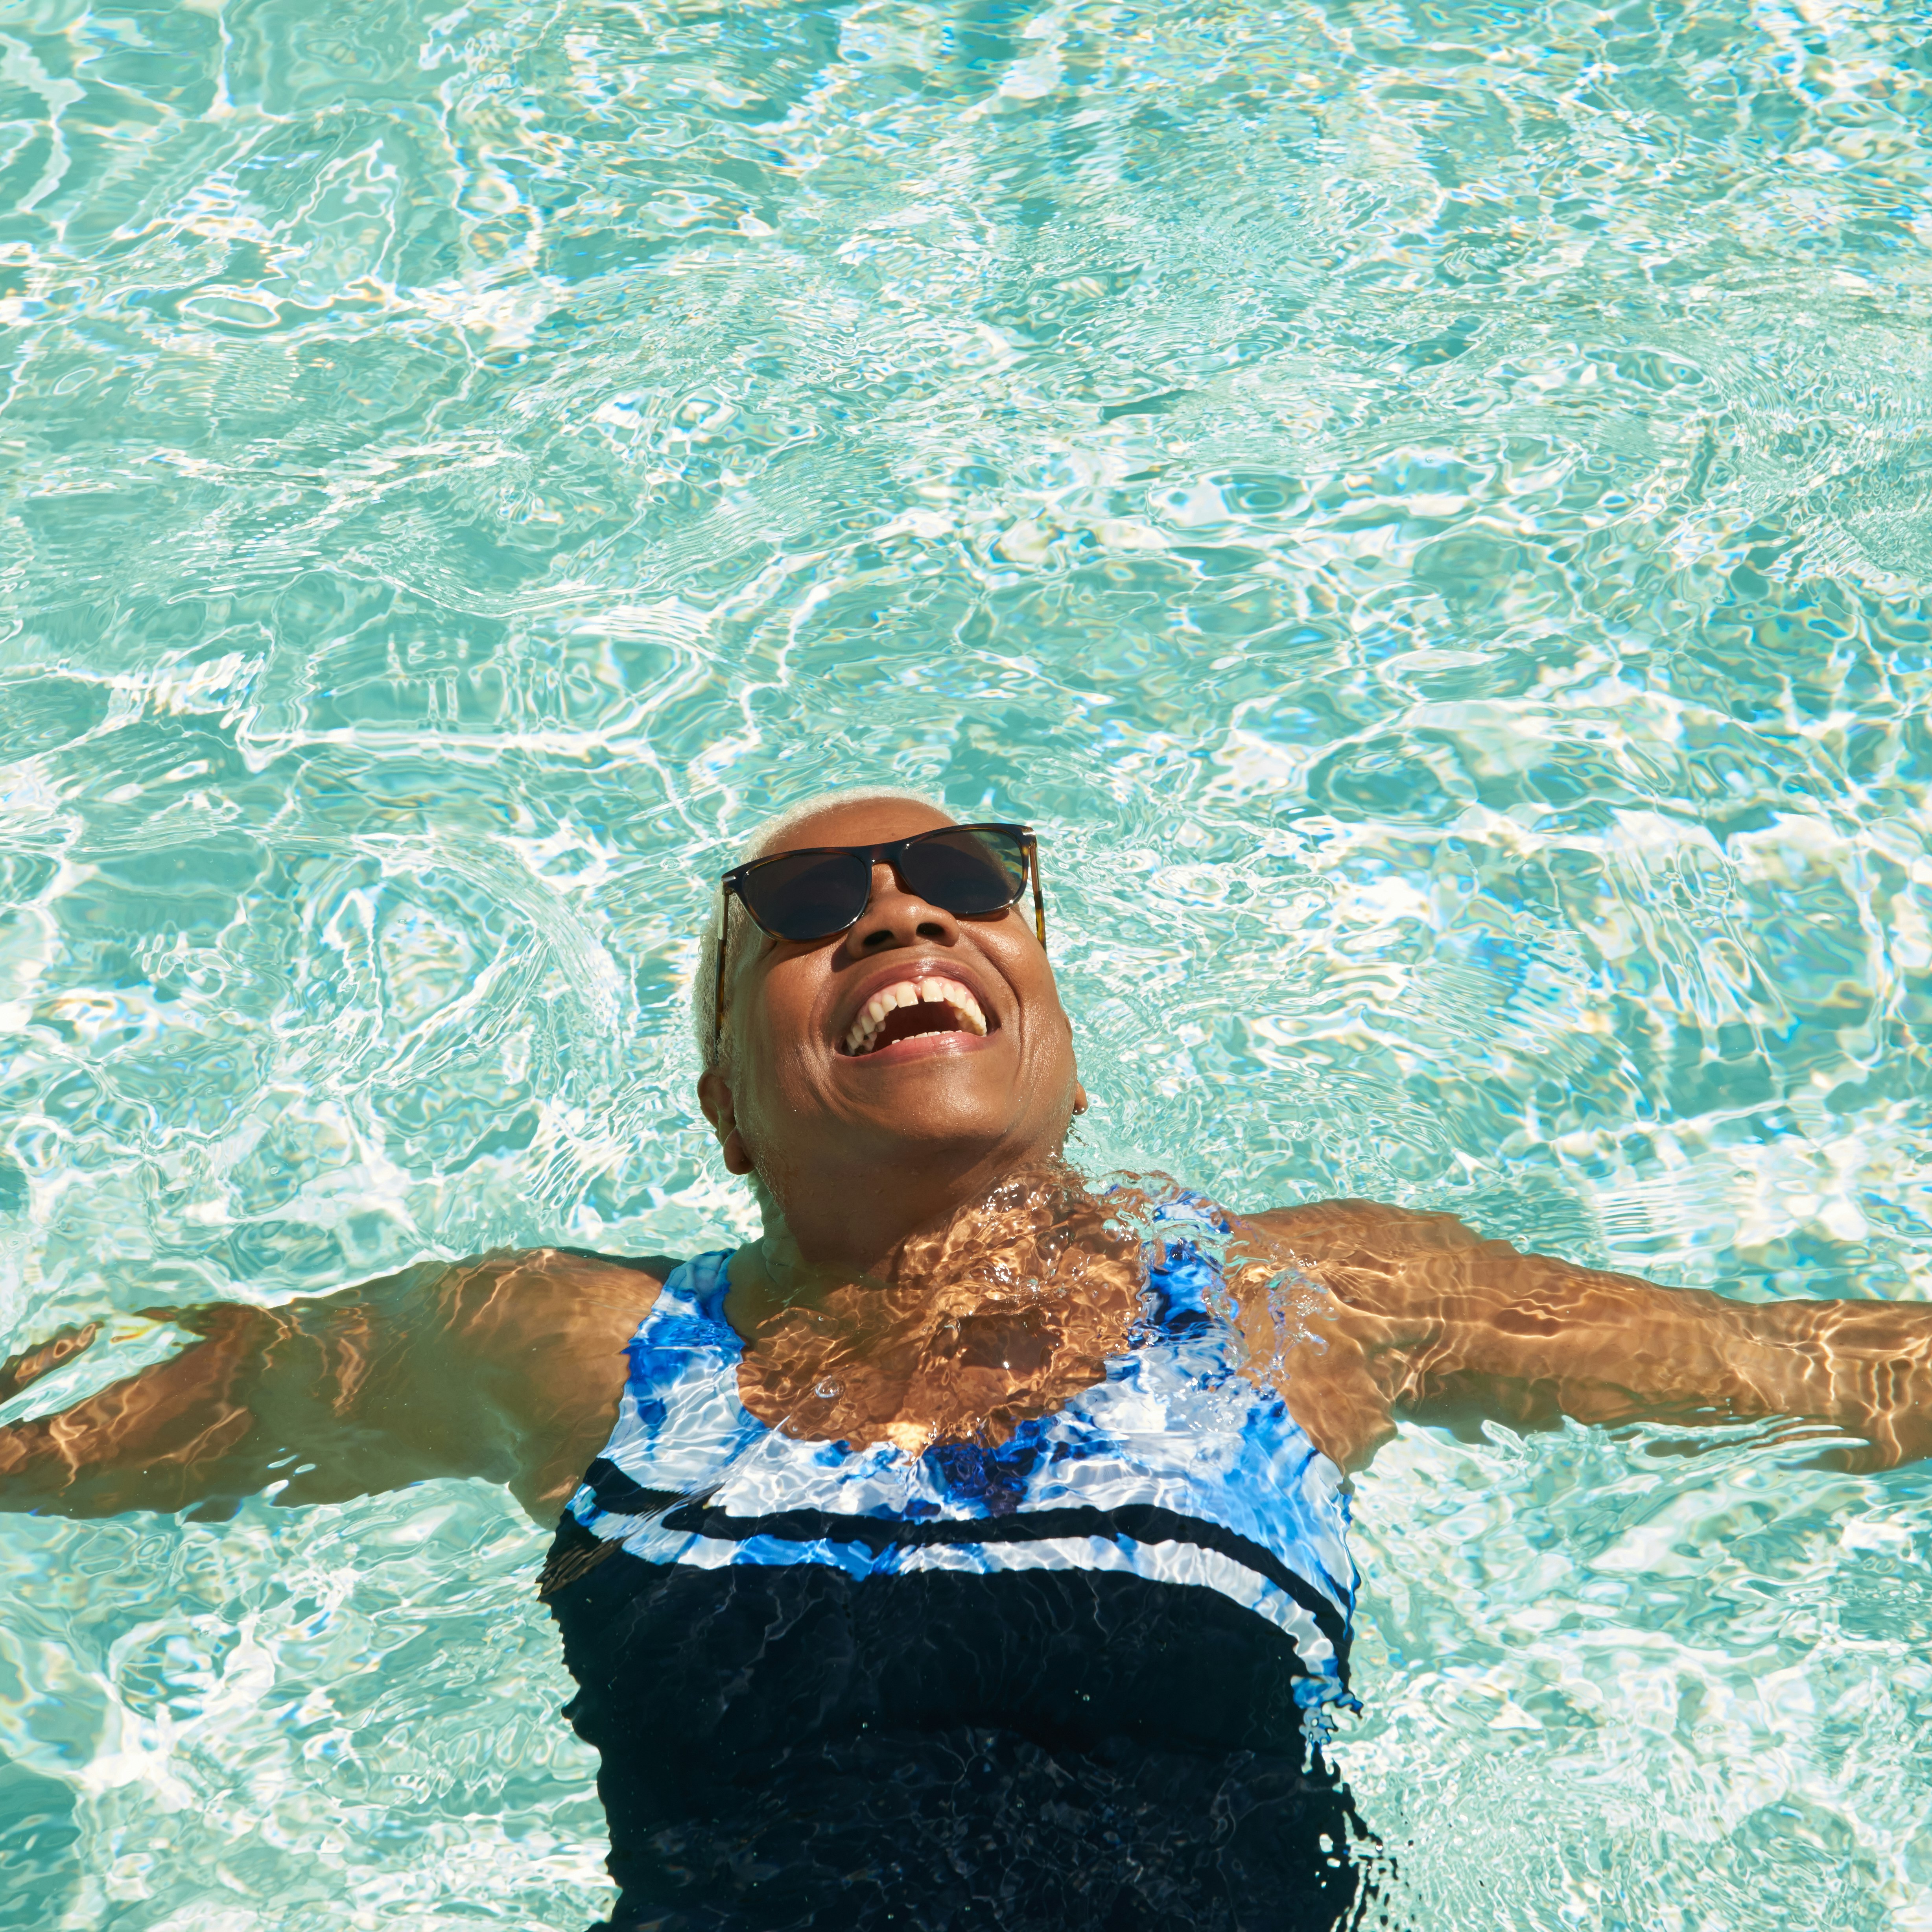 An older woman relaxes on her back in the pool enjoying the sunshine